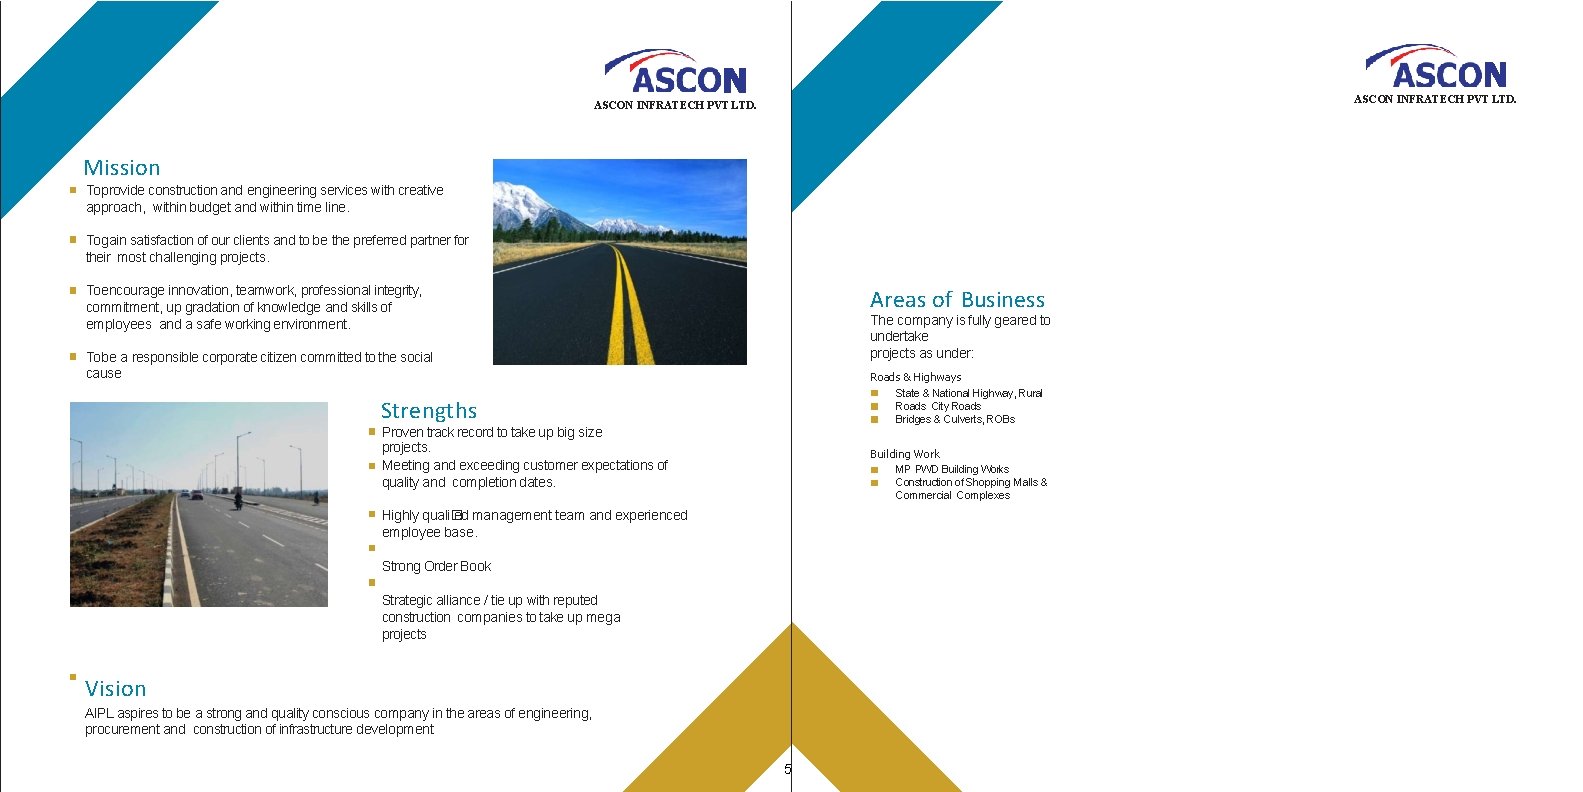 ASCON INFRATECH PVT LTD. Mission To provide construction and engineering services with creative approach,